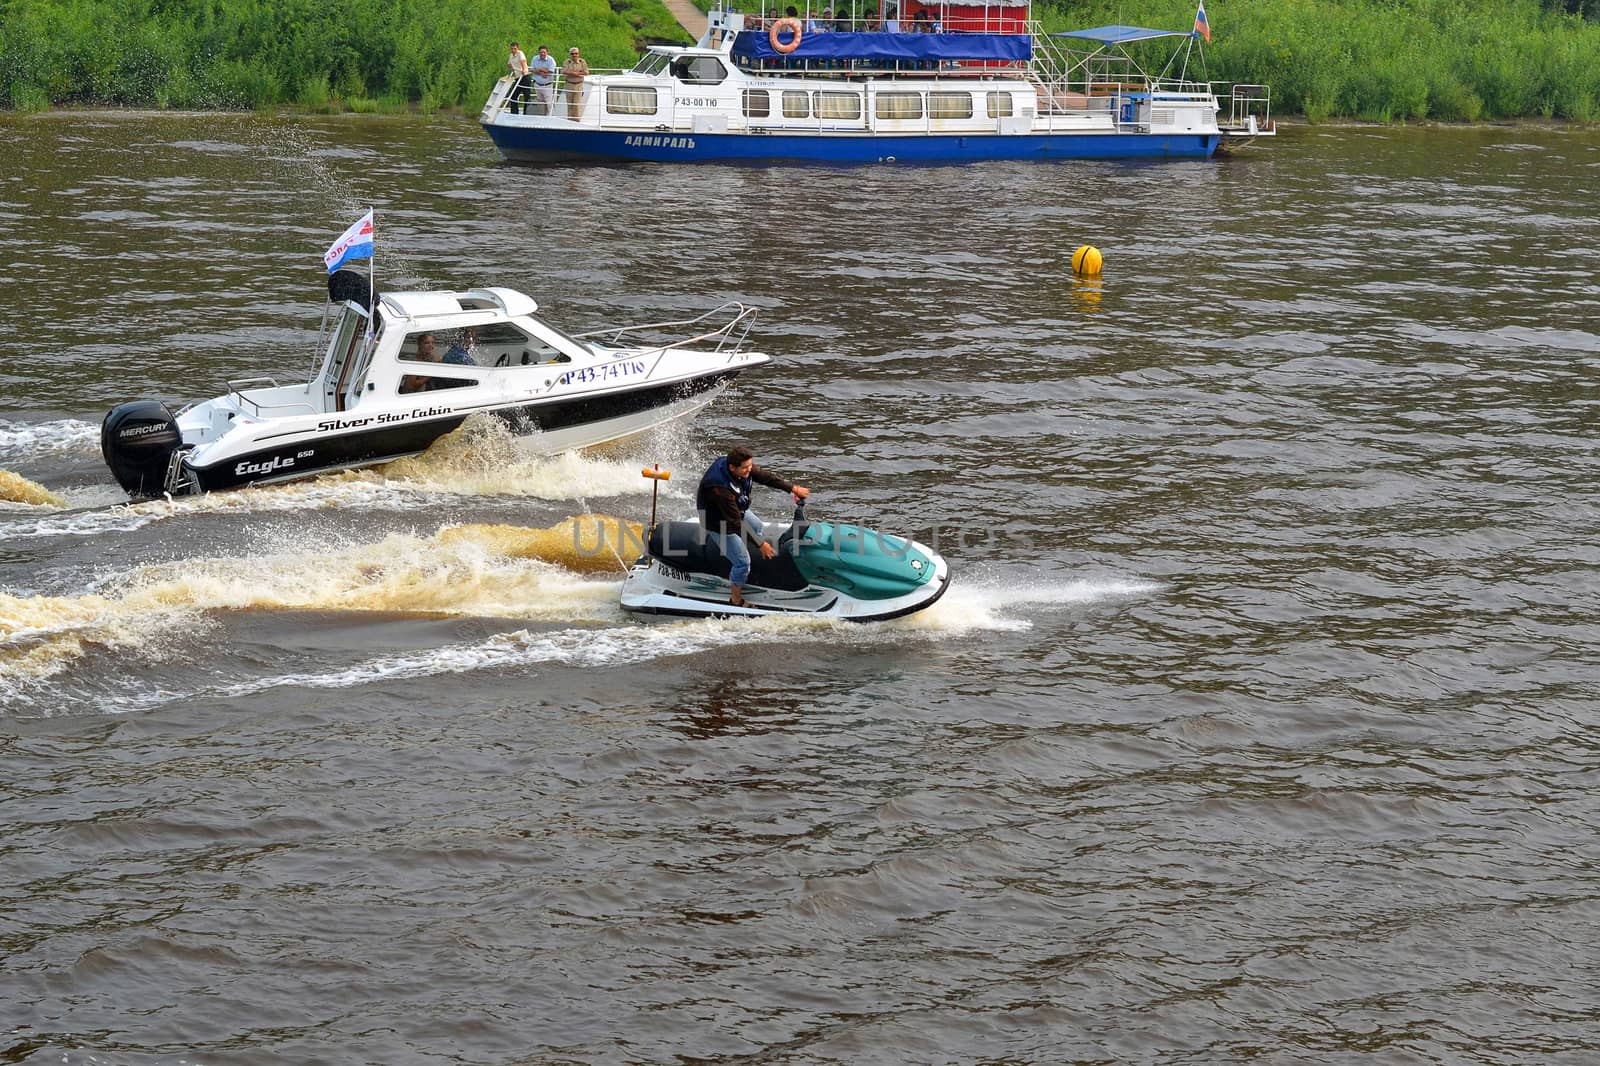 The man on a hydrocycle floats down the river